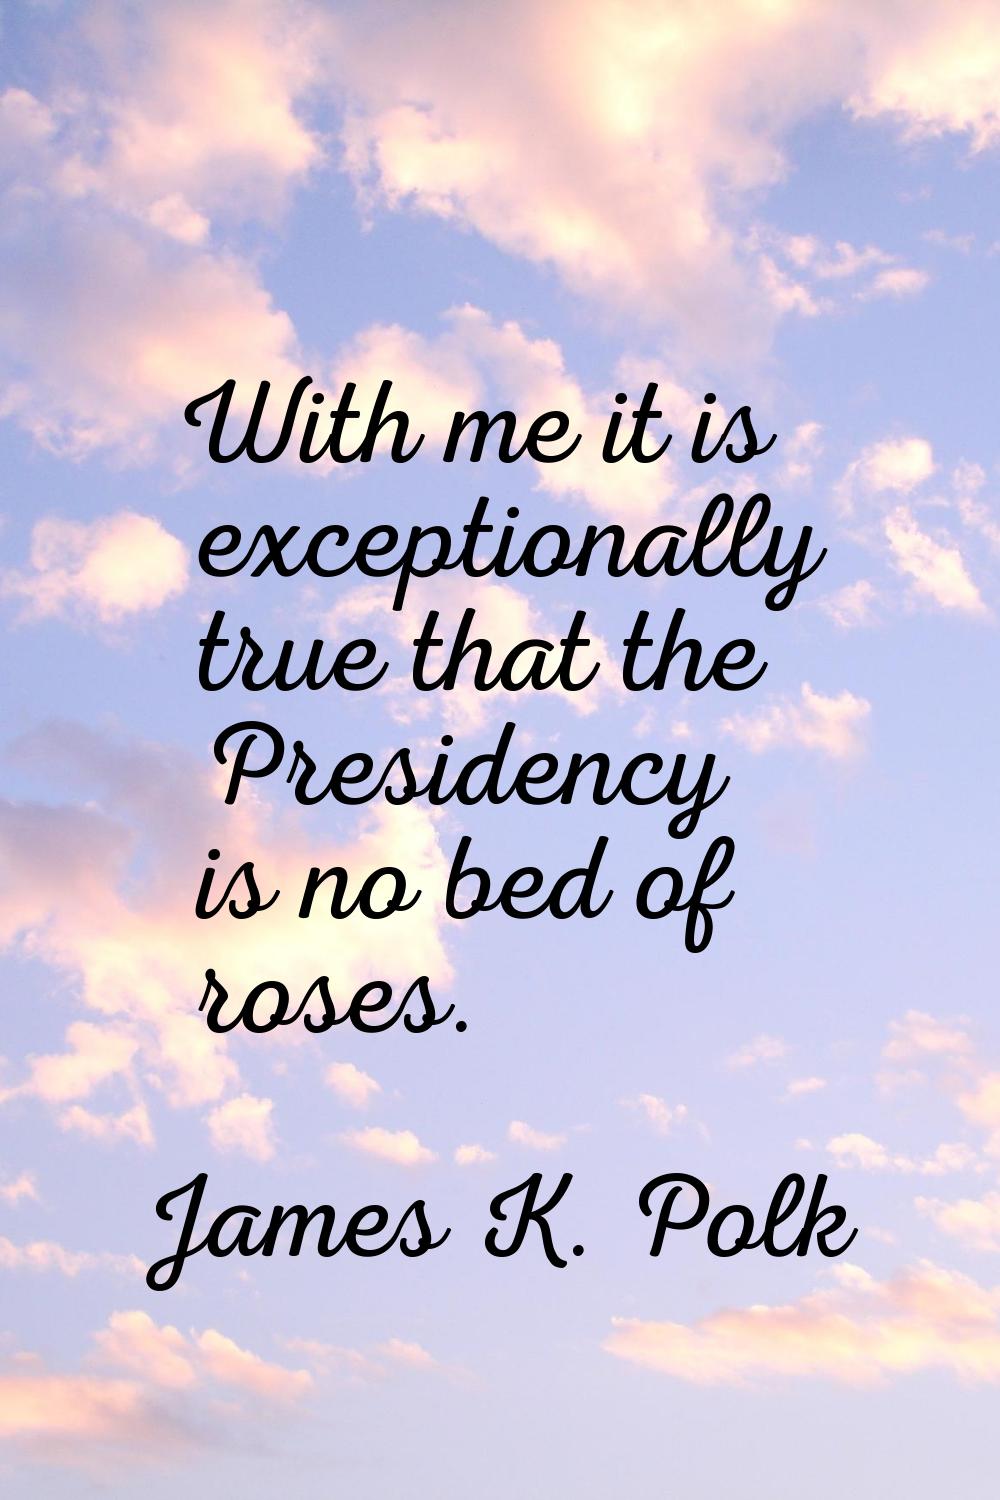 With me it is exceptionally true that the Presidency is no bed of roses.